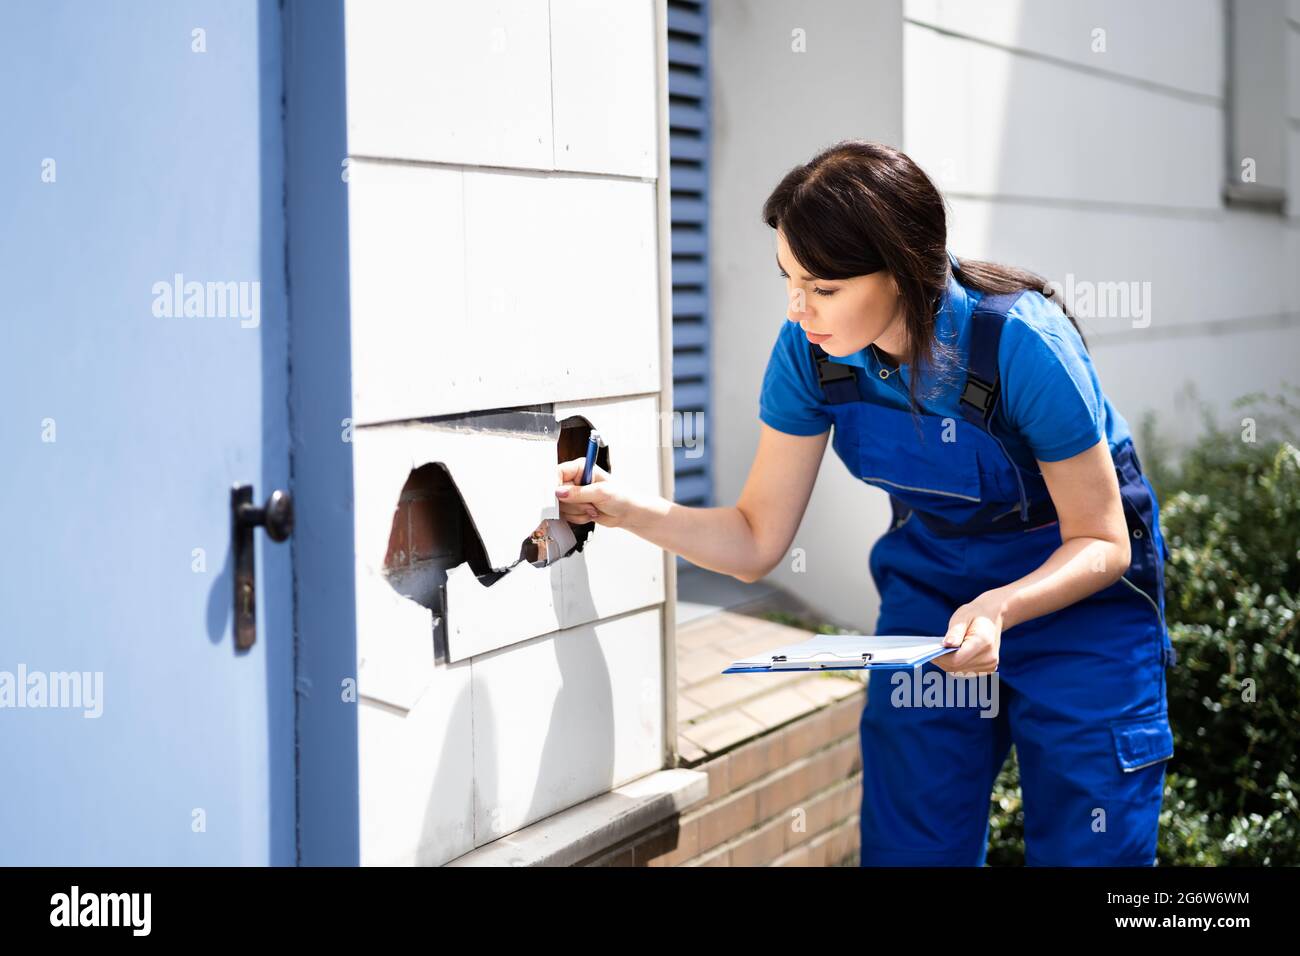 Real Estate Property Appraisal. Woman Inspecting House Stock Photo